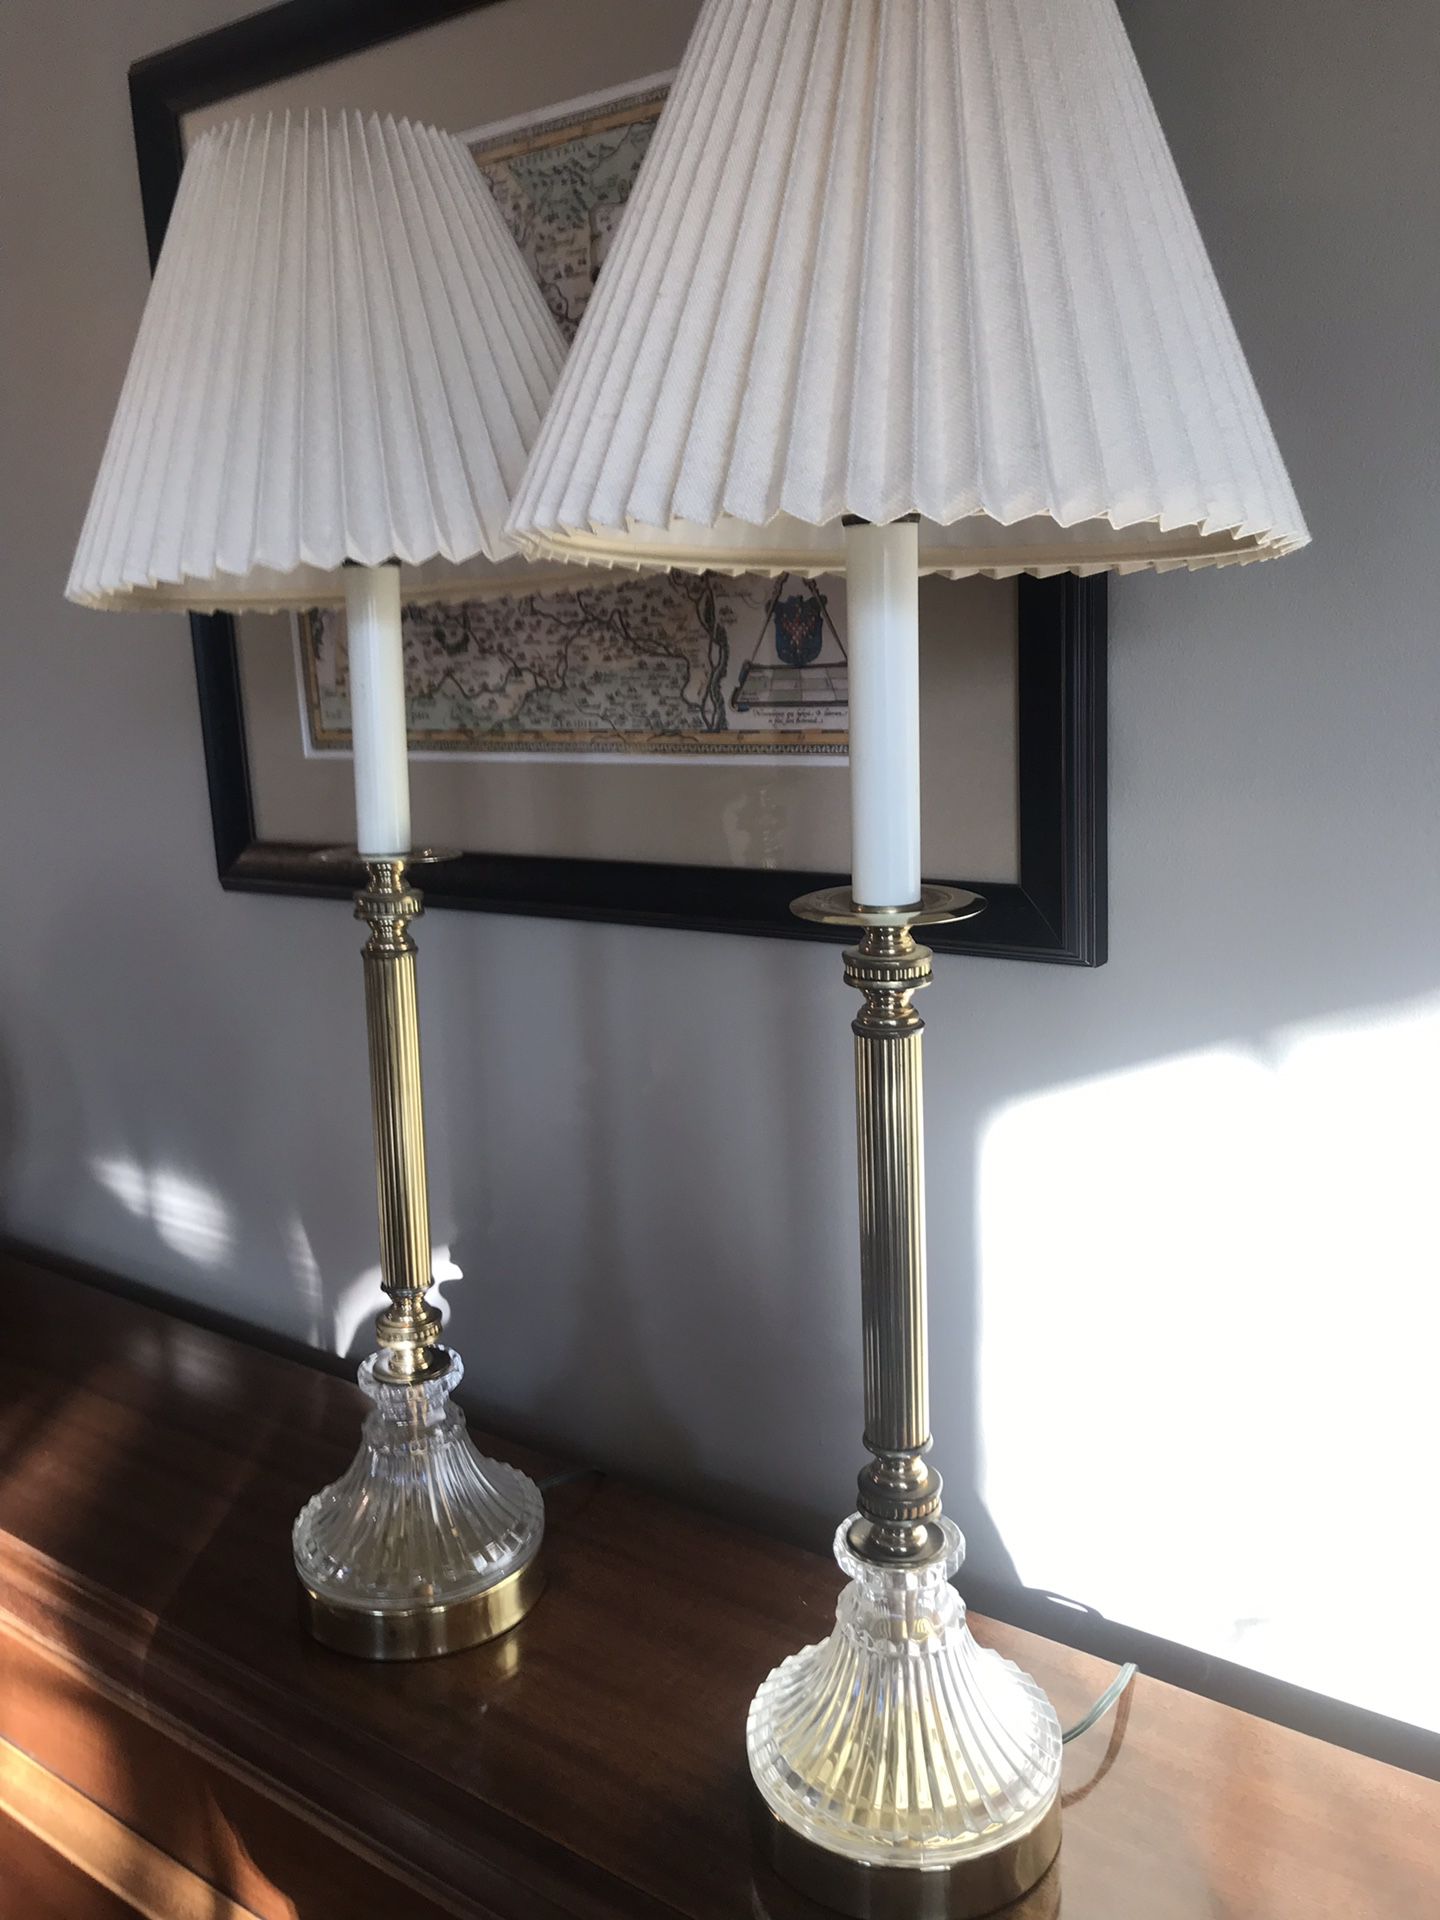 Set of 2 Antique candle stick style lamps !